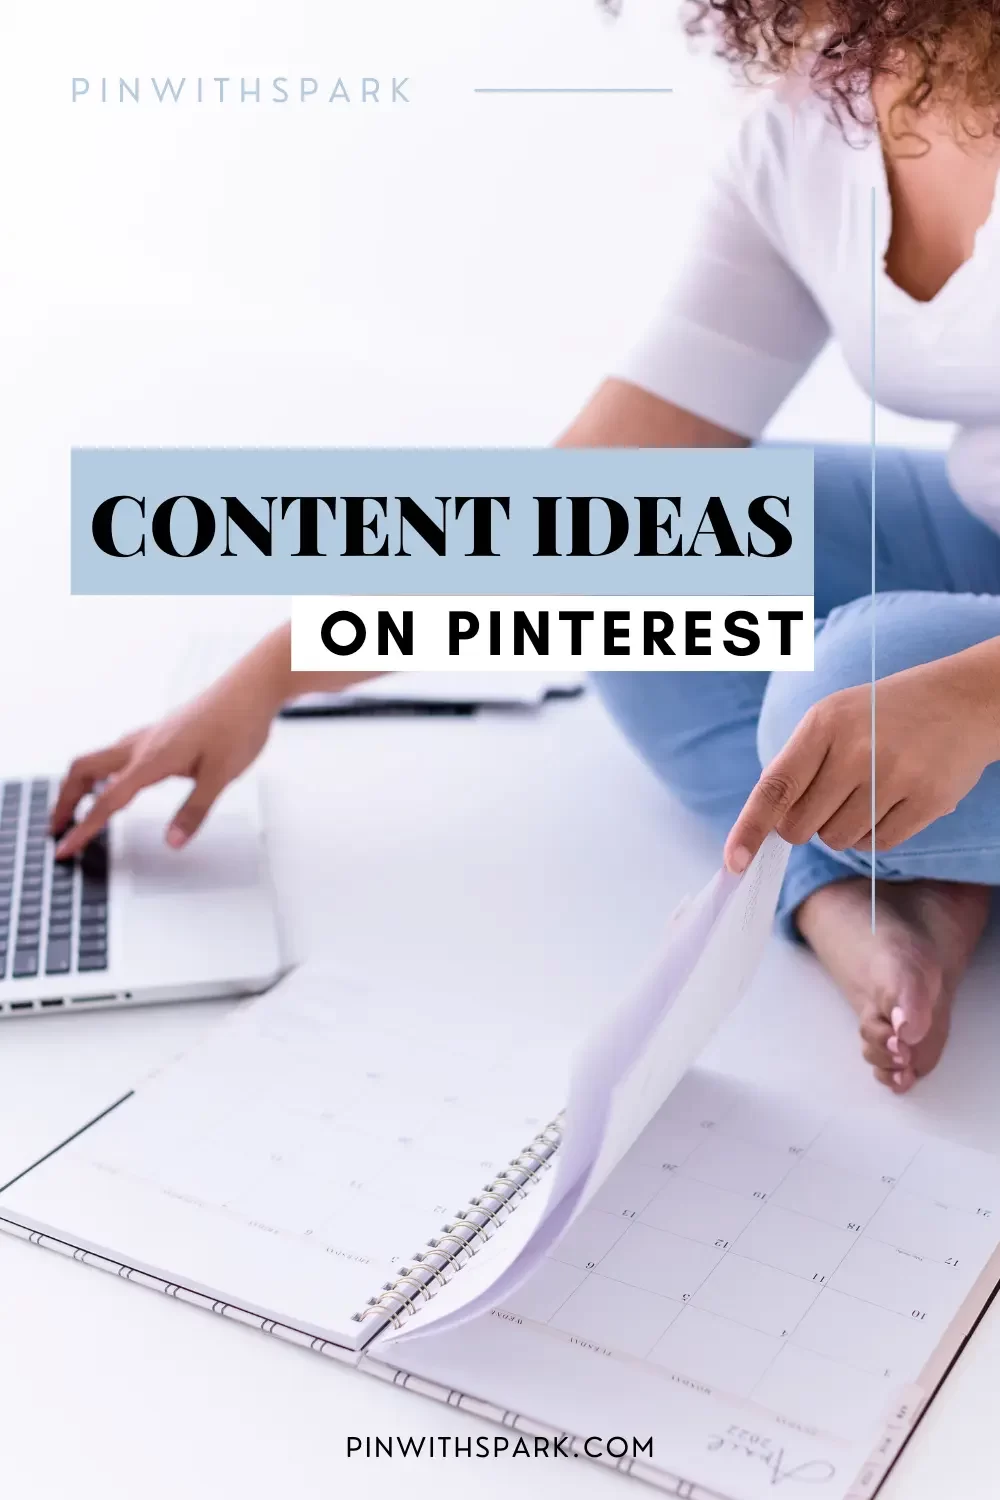 Content ideas on Pinterest pinwithspark.com, woman seated crosslegged with hand on laptop keyboard